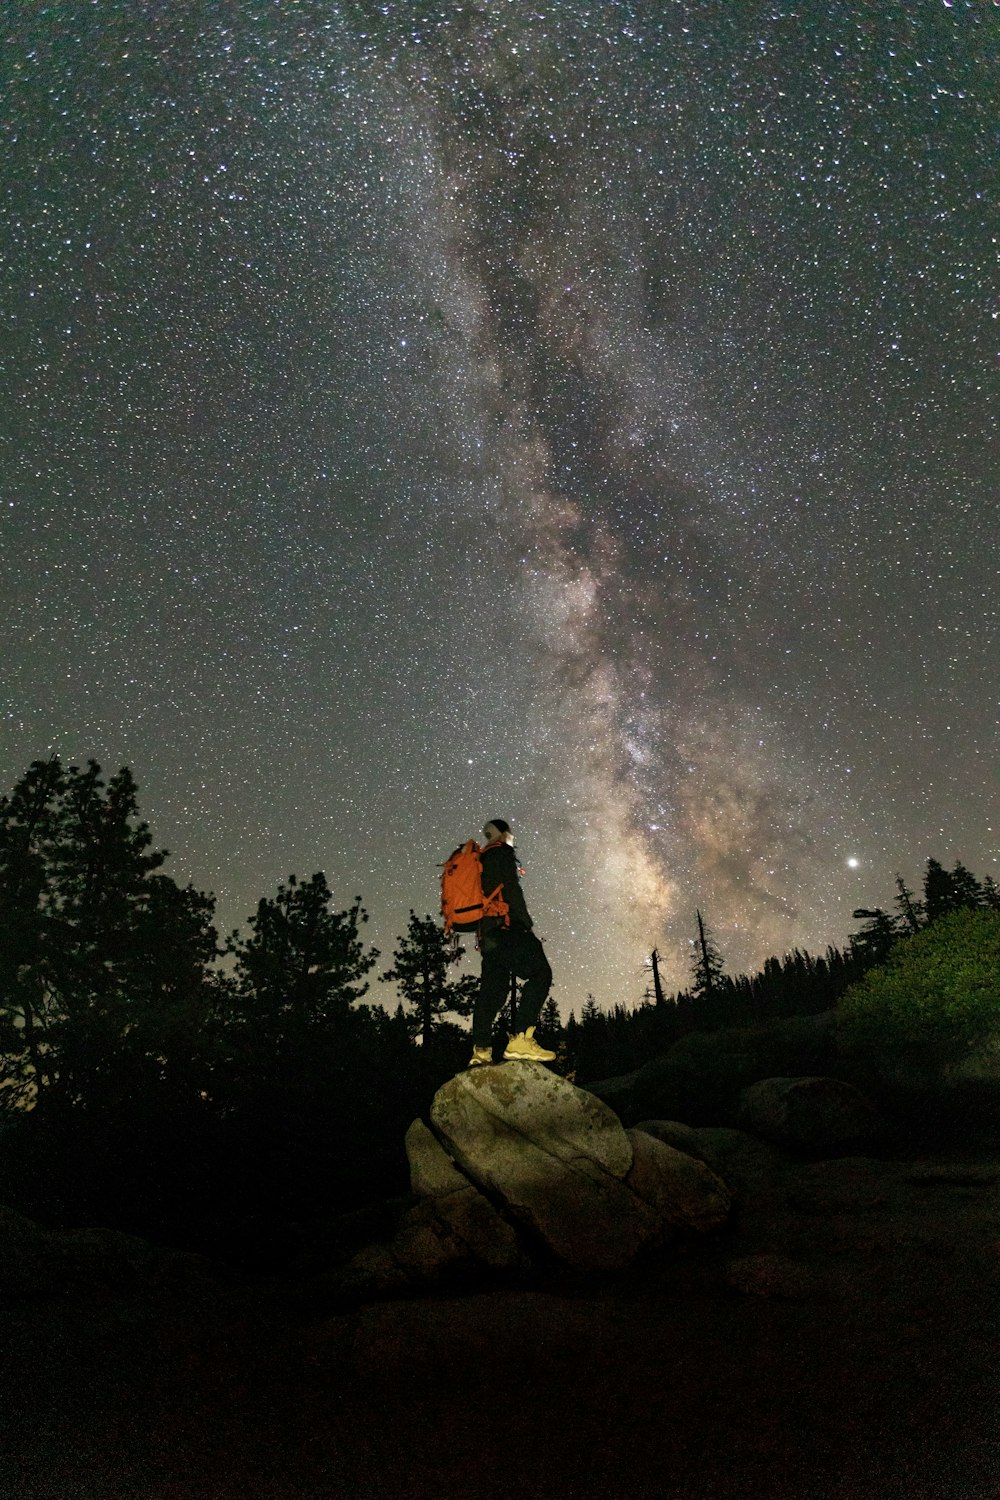 a man standing on top of a rock under a night sky filled with stars